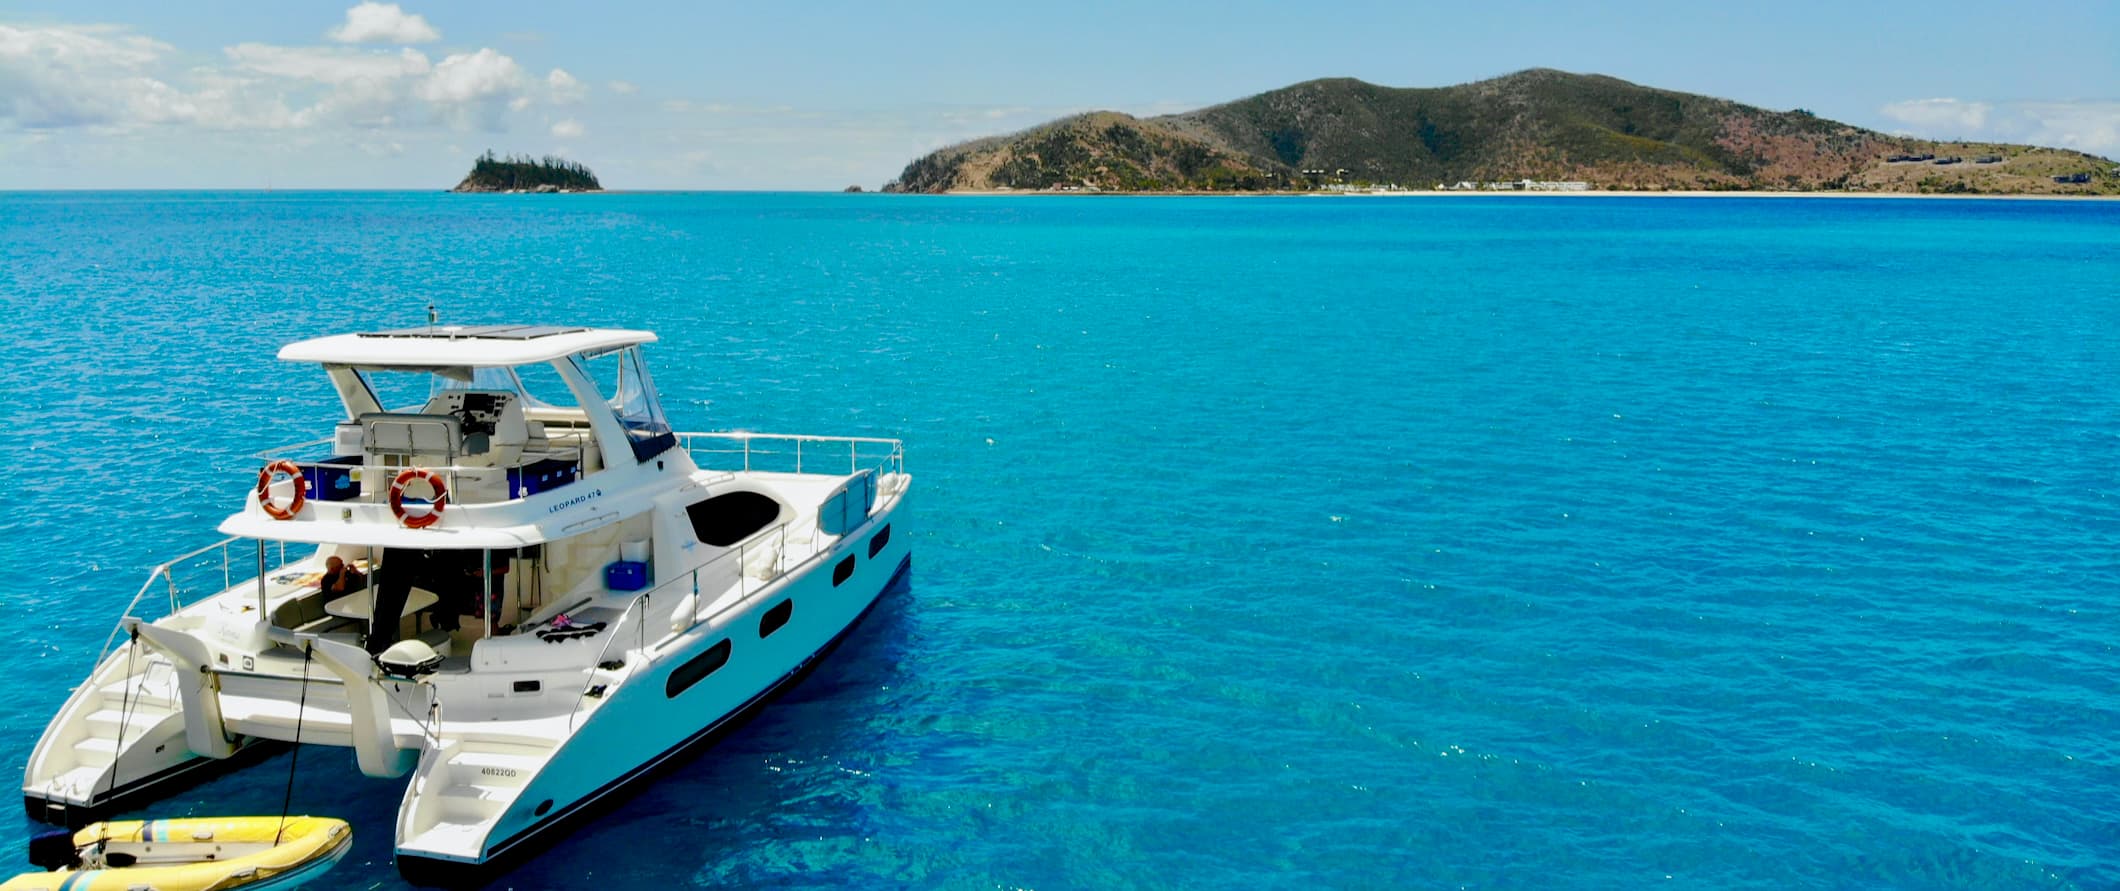 A diving boat anchored out in the pristine waters of the Whitsunday Islands in Australia